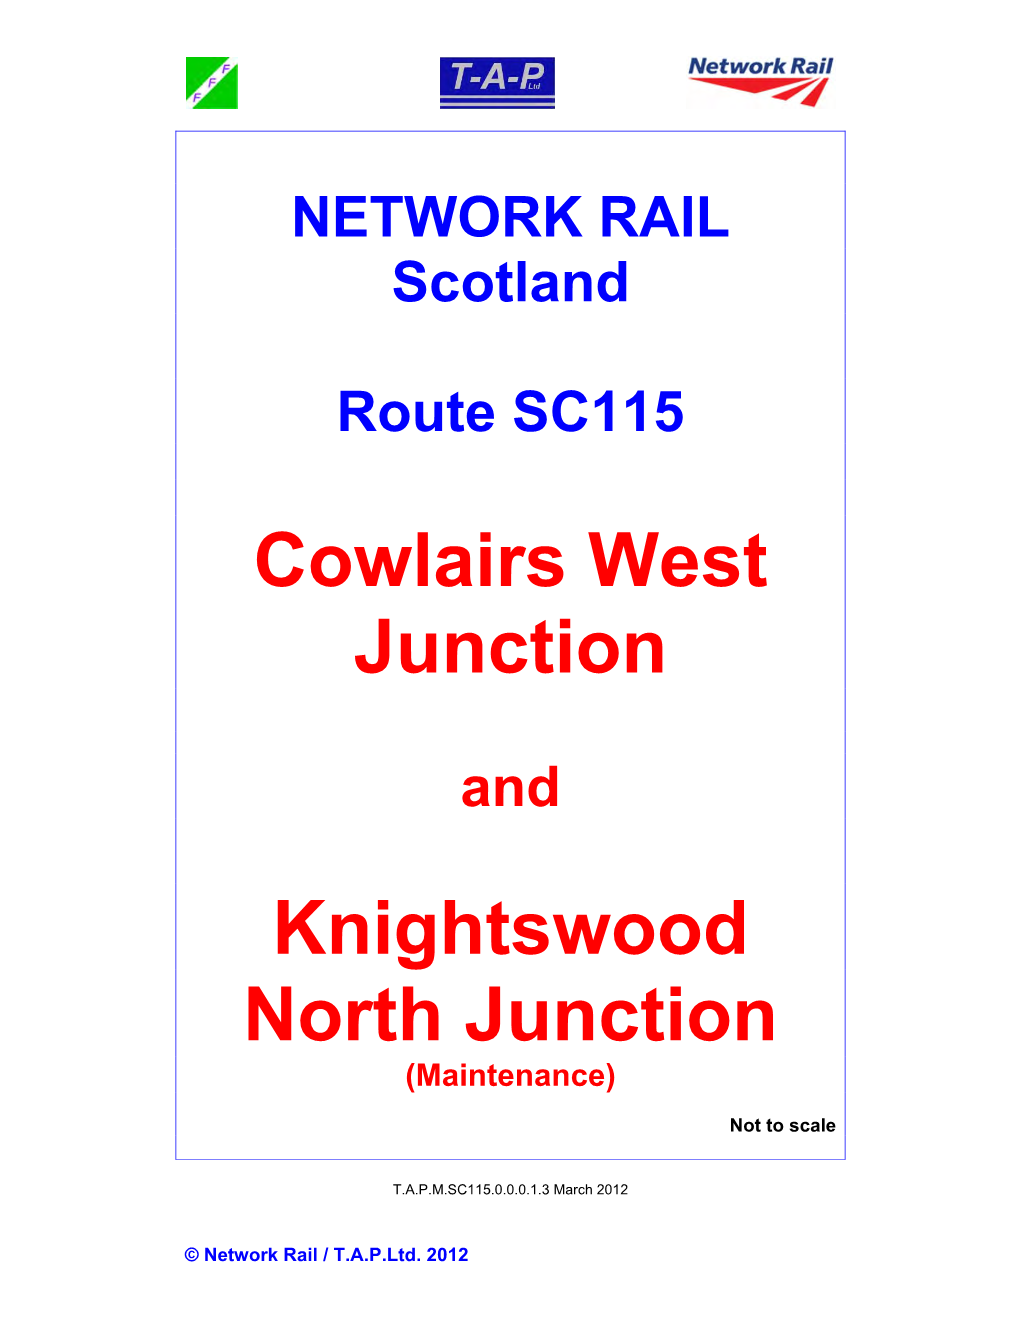 Cowlairs West Junction Knightswood North Junction